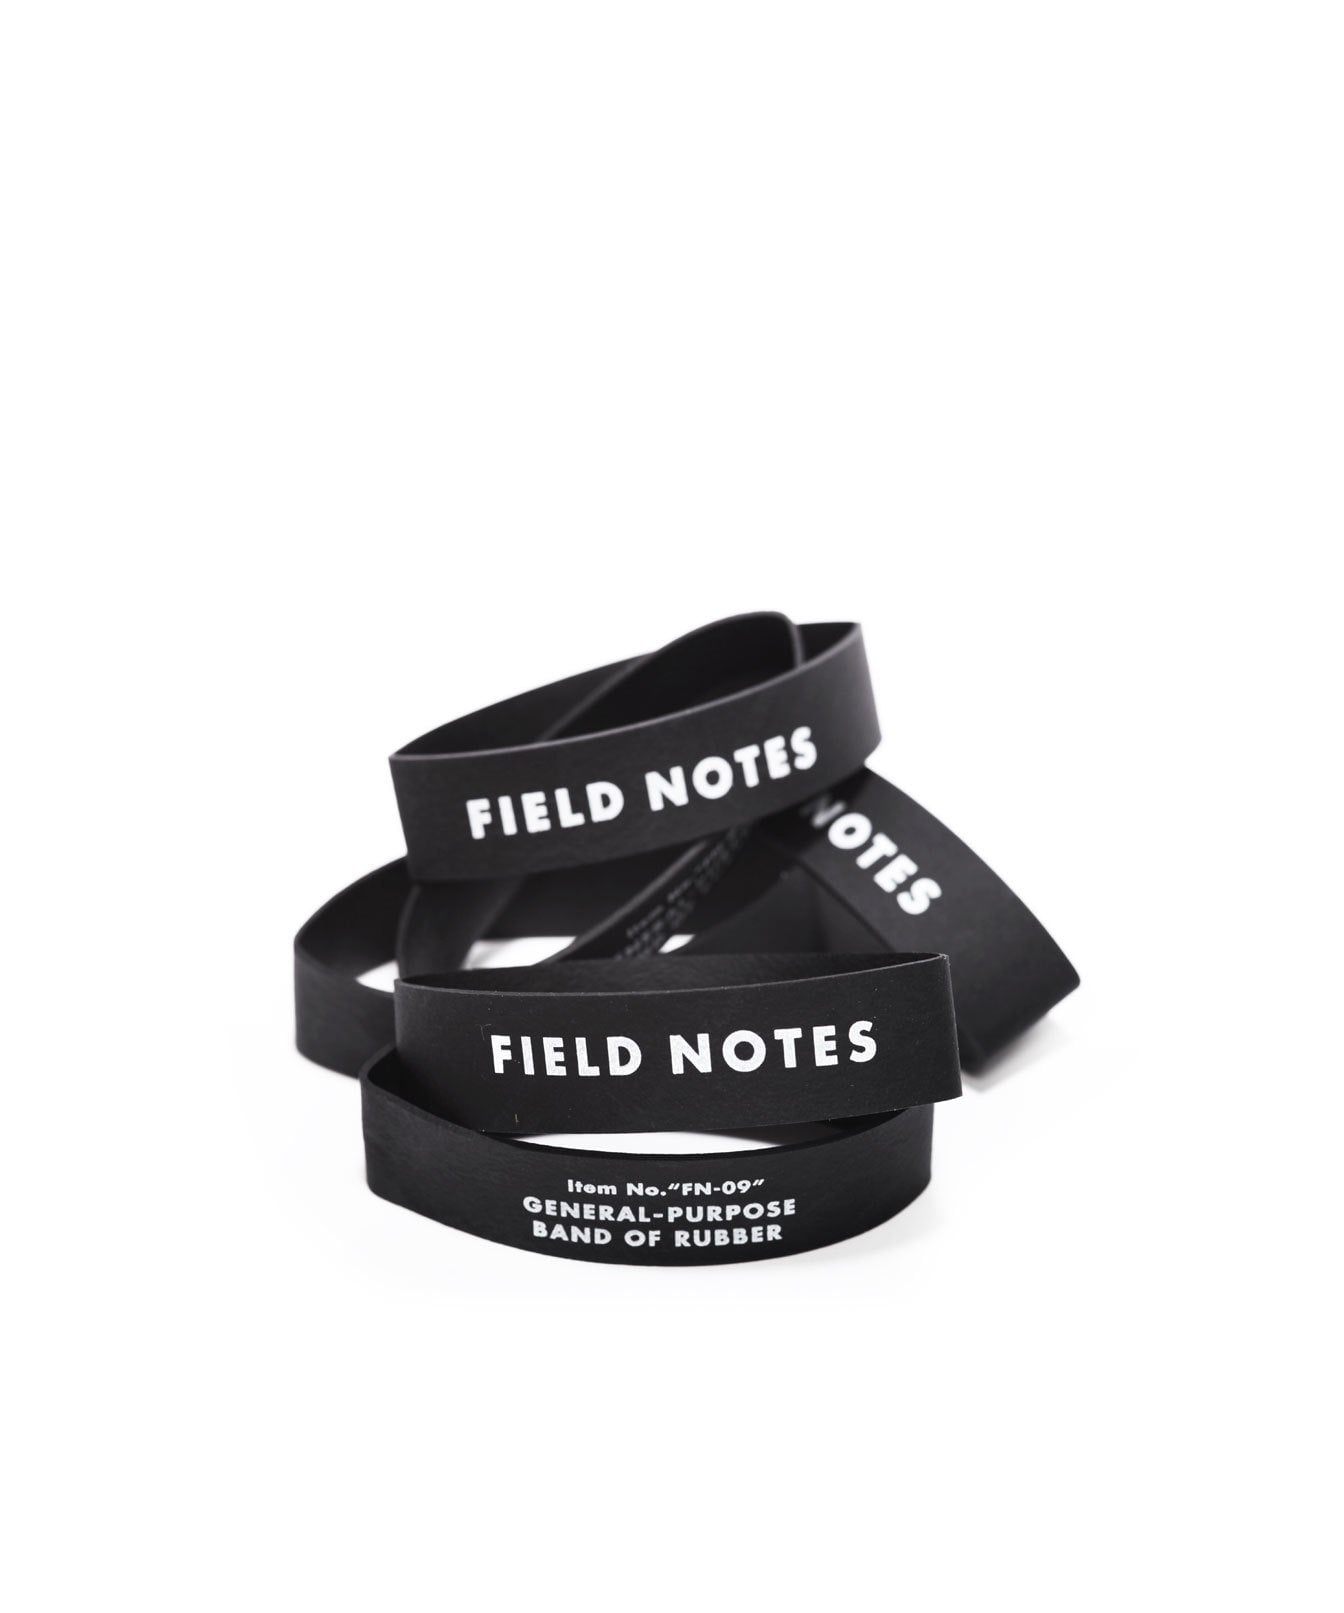 Field Notes "Band Of Rubber" 12-Pack Gummiband Gummiband Field Notes 